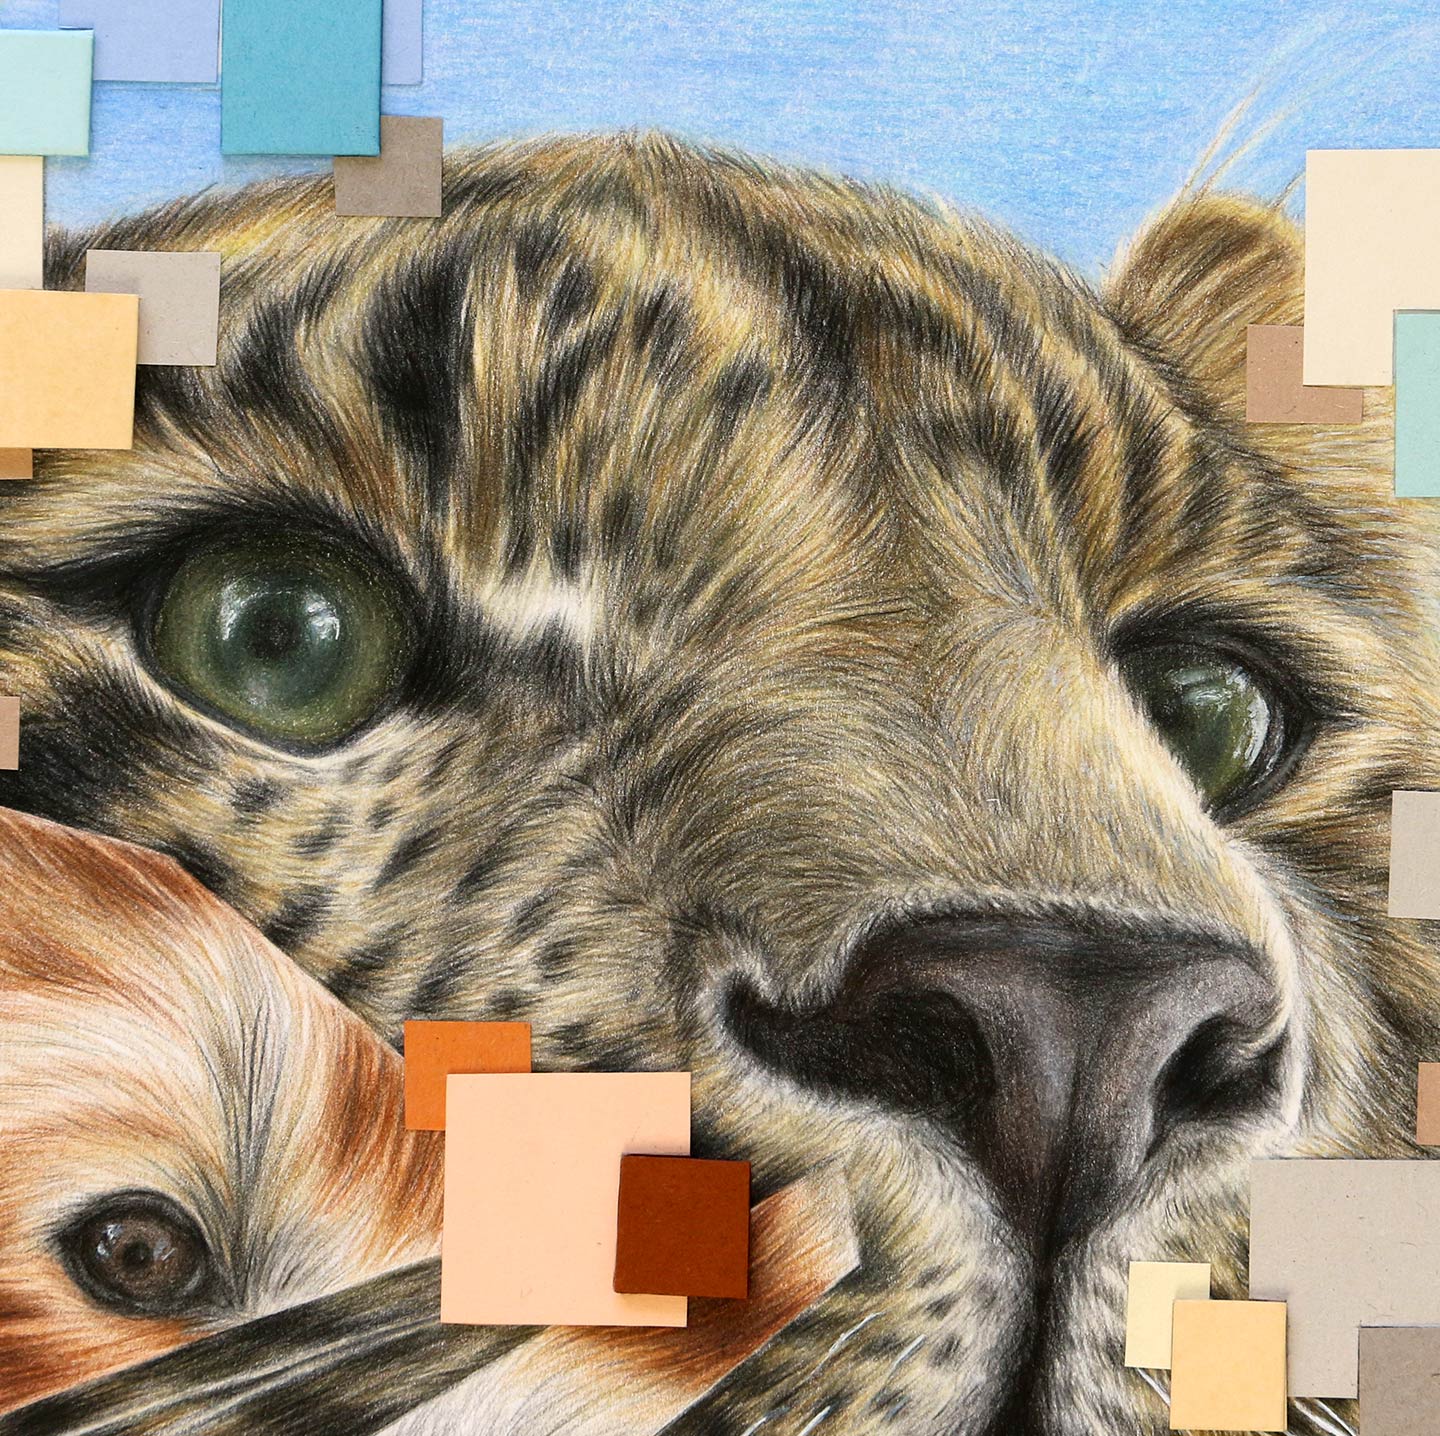 closeup of leopard eyes, nose and whisker details with red panda eye collaged into left side of face